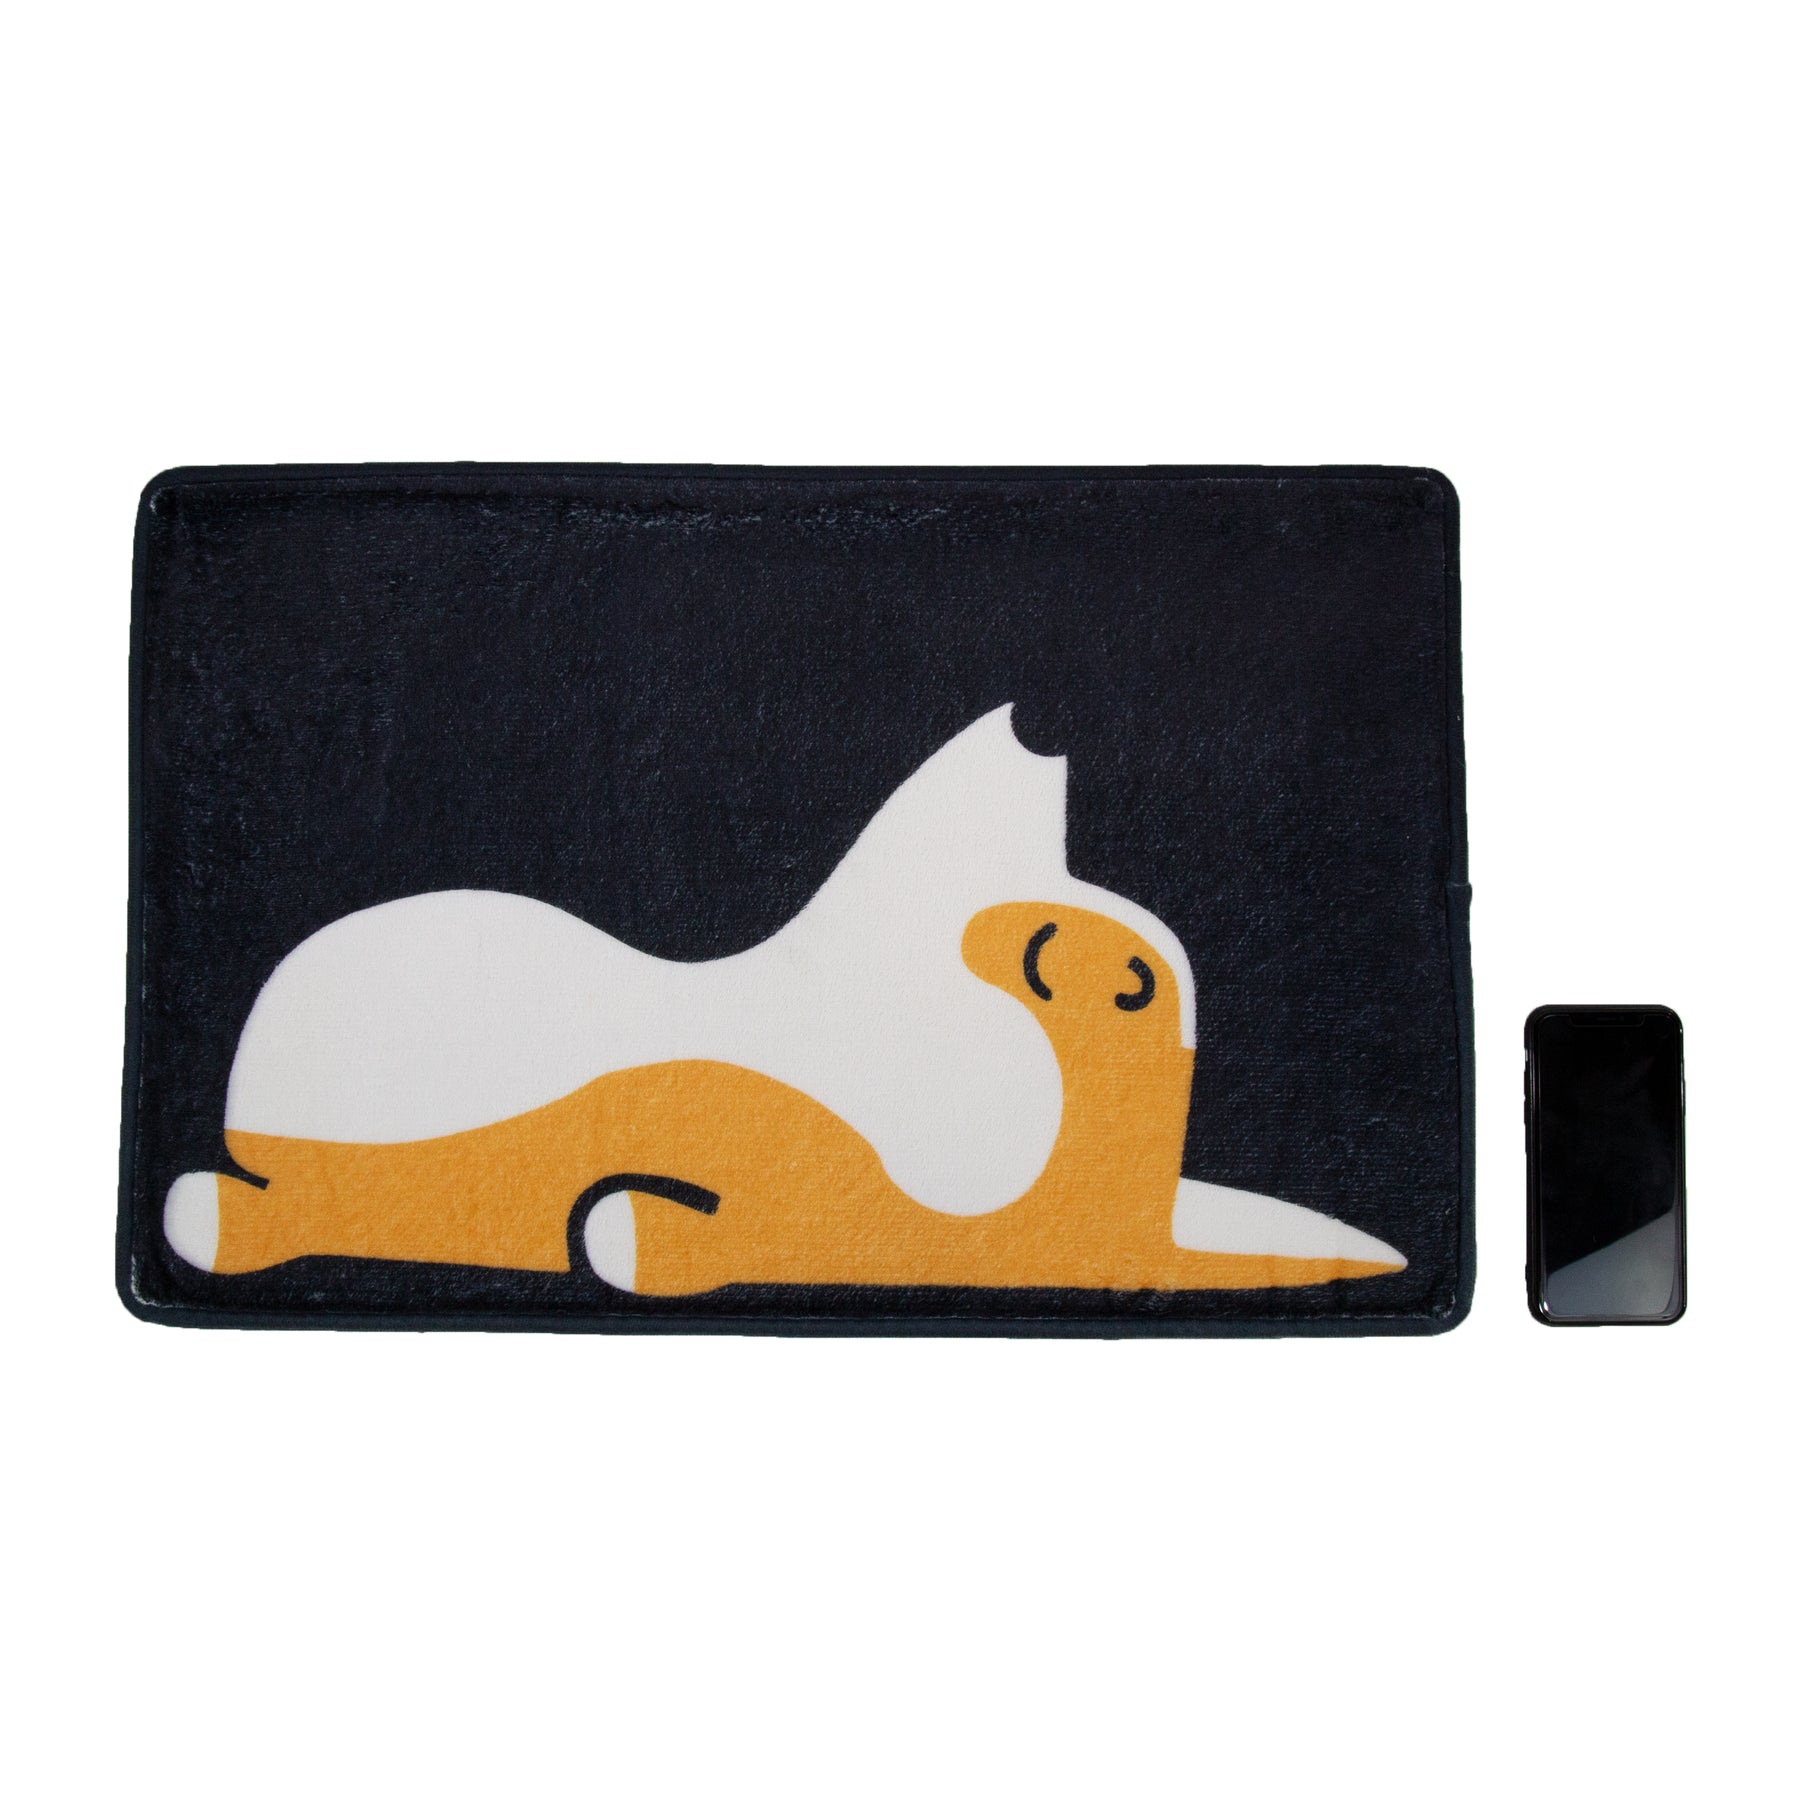 Black Corgi Door Mat With Cell Phone For Size Comparison